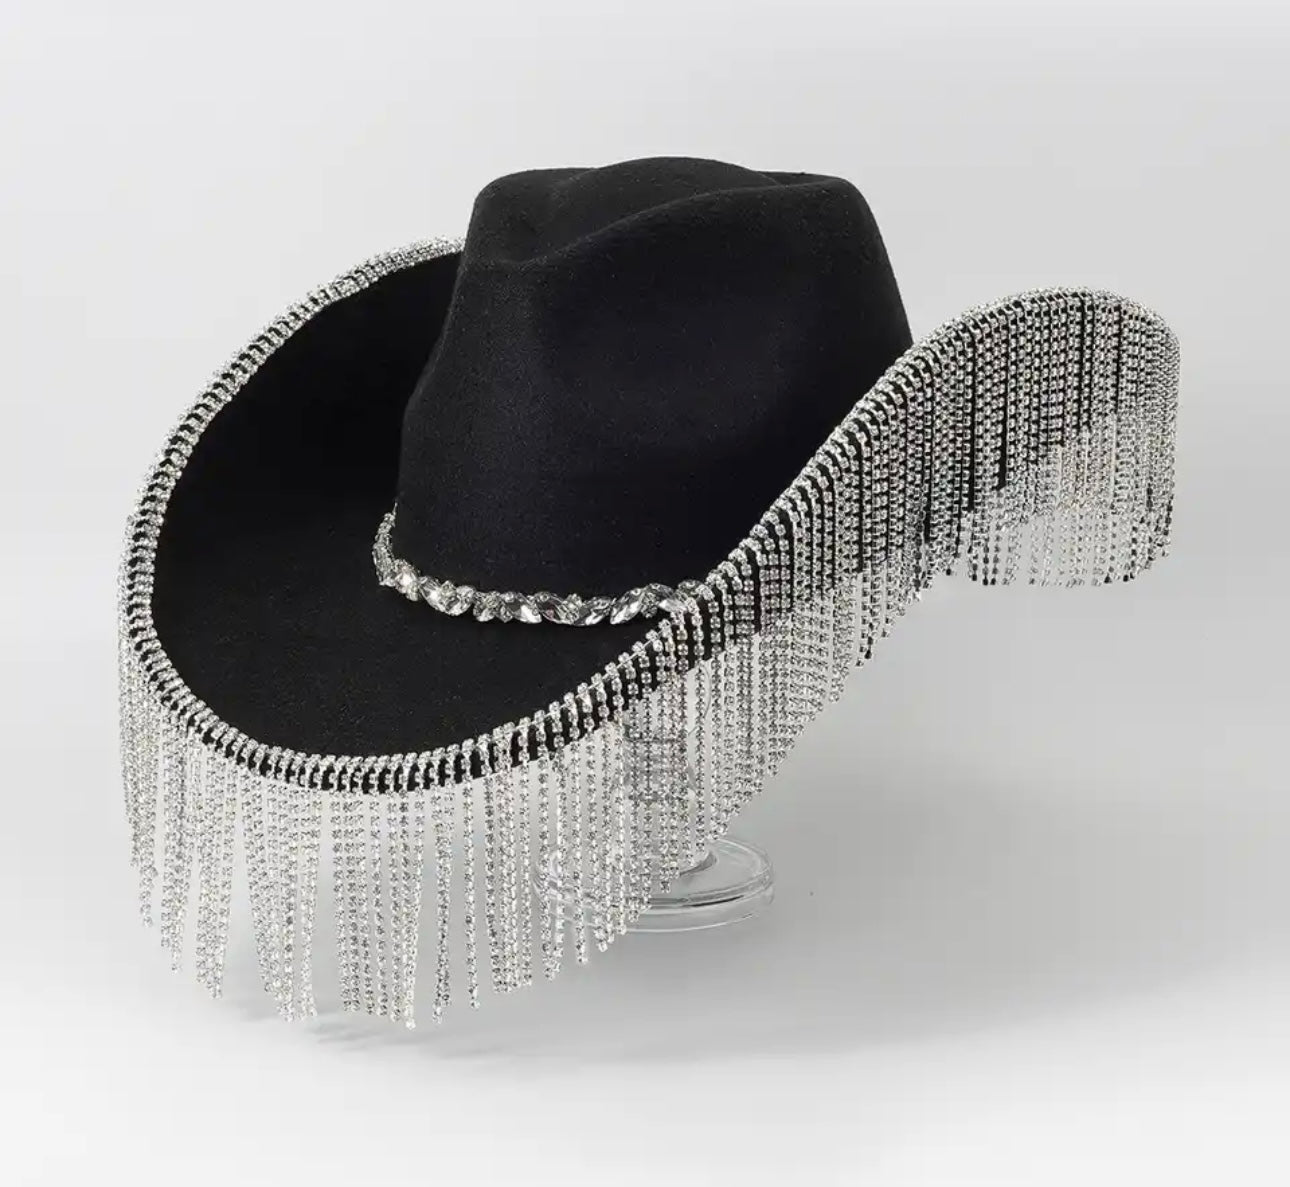 The Riding Glamorous Hat (Comes In Other Gorgeous Colors)